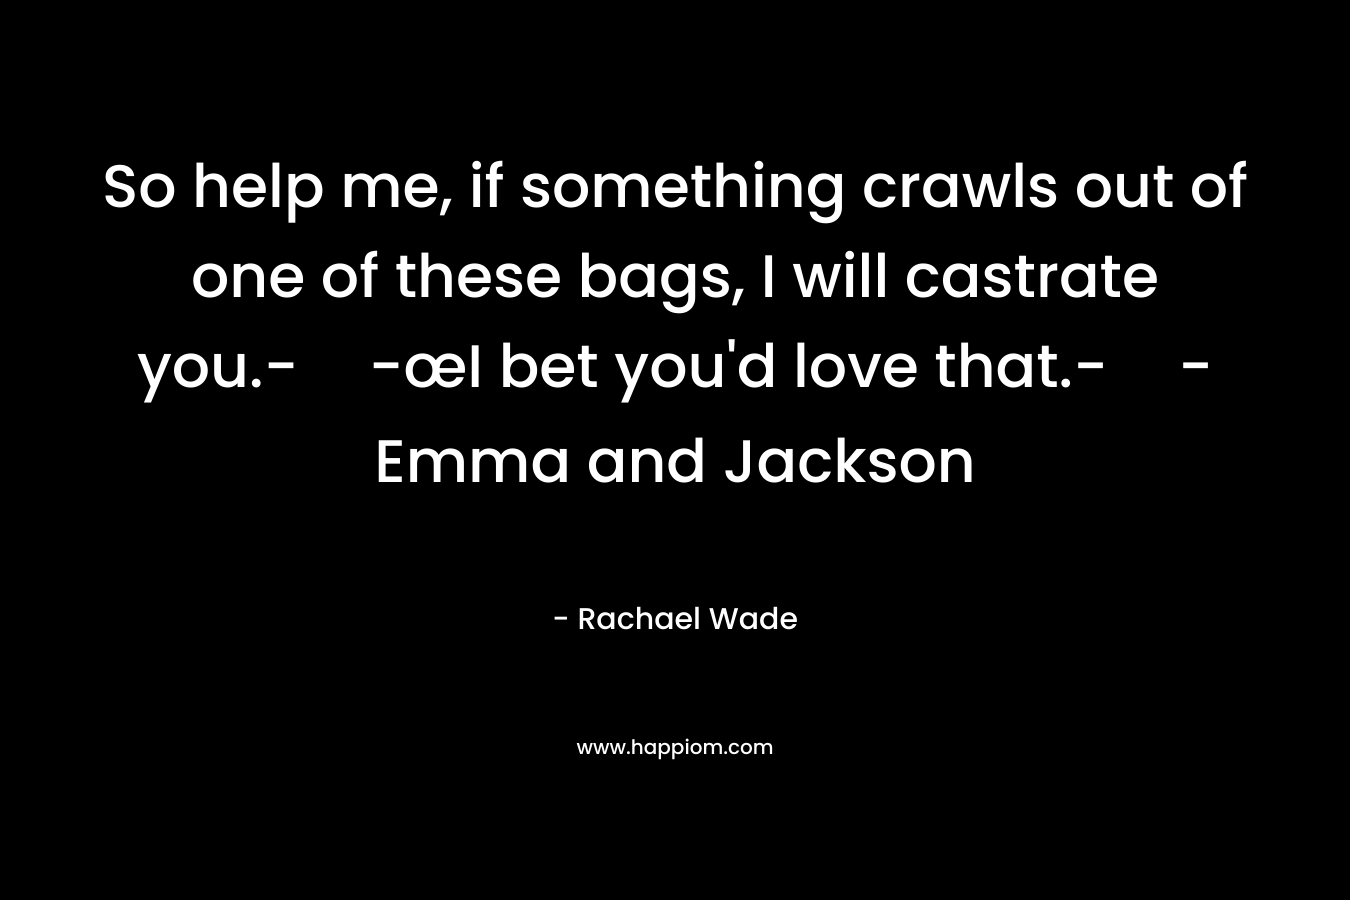 So help me, if something crawls out of one of these bags, I will castrate you.--œI bet you’d love that.--Emma and Jackson – Rachael Wade